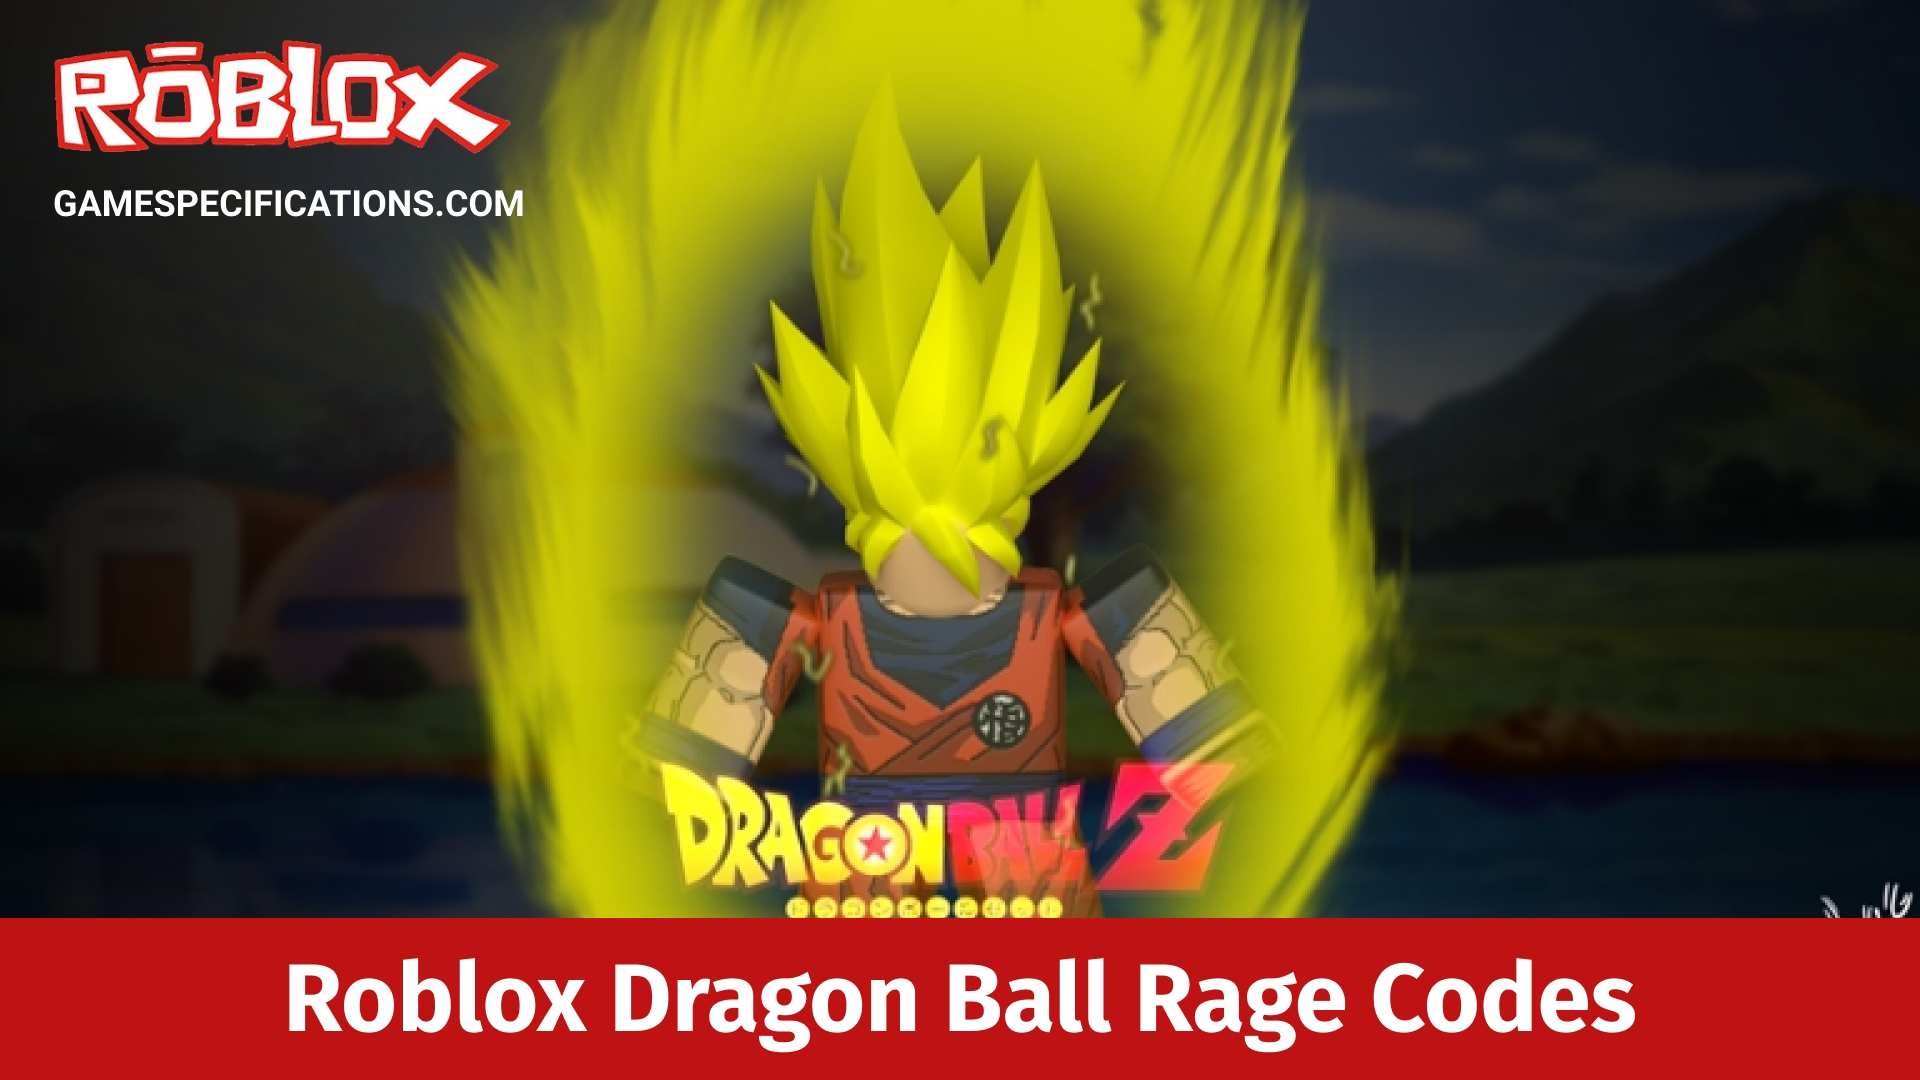 Roblox Dragon Ball Rage Codes July 2021 Game Specifications - dragon ball simulator roblox